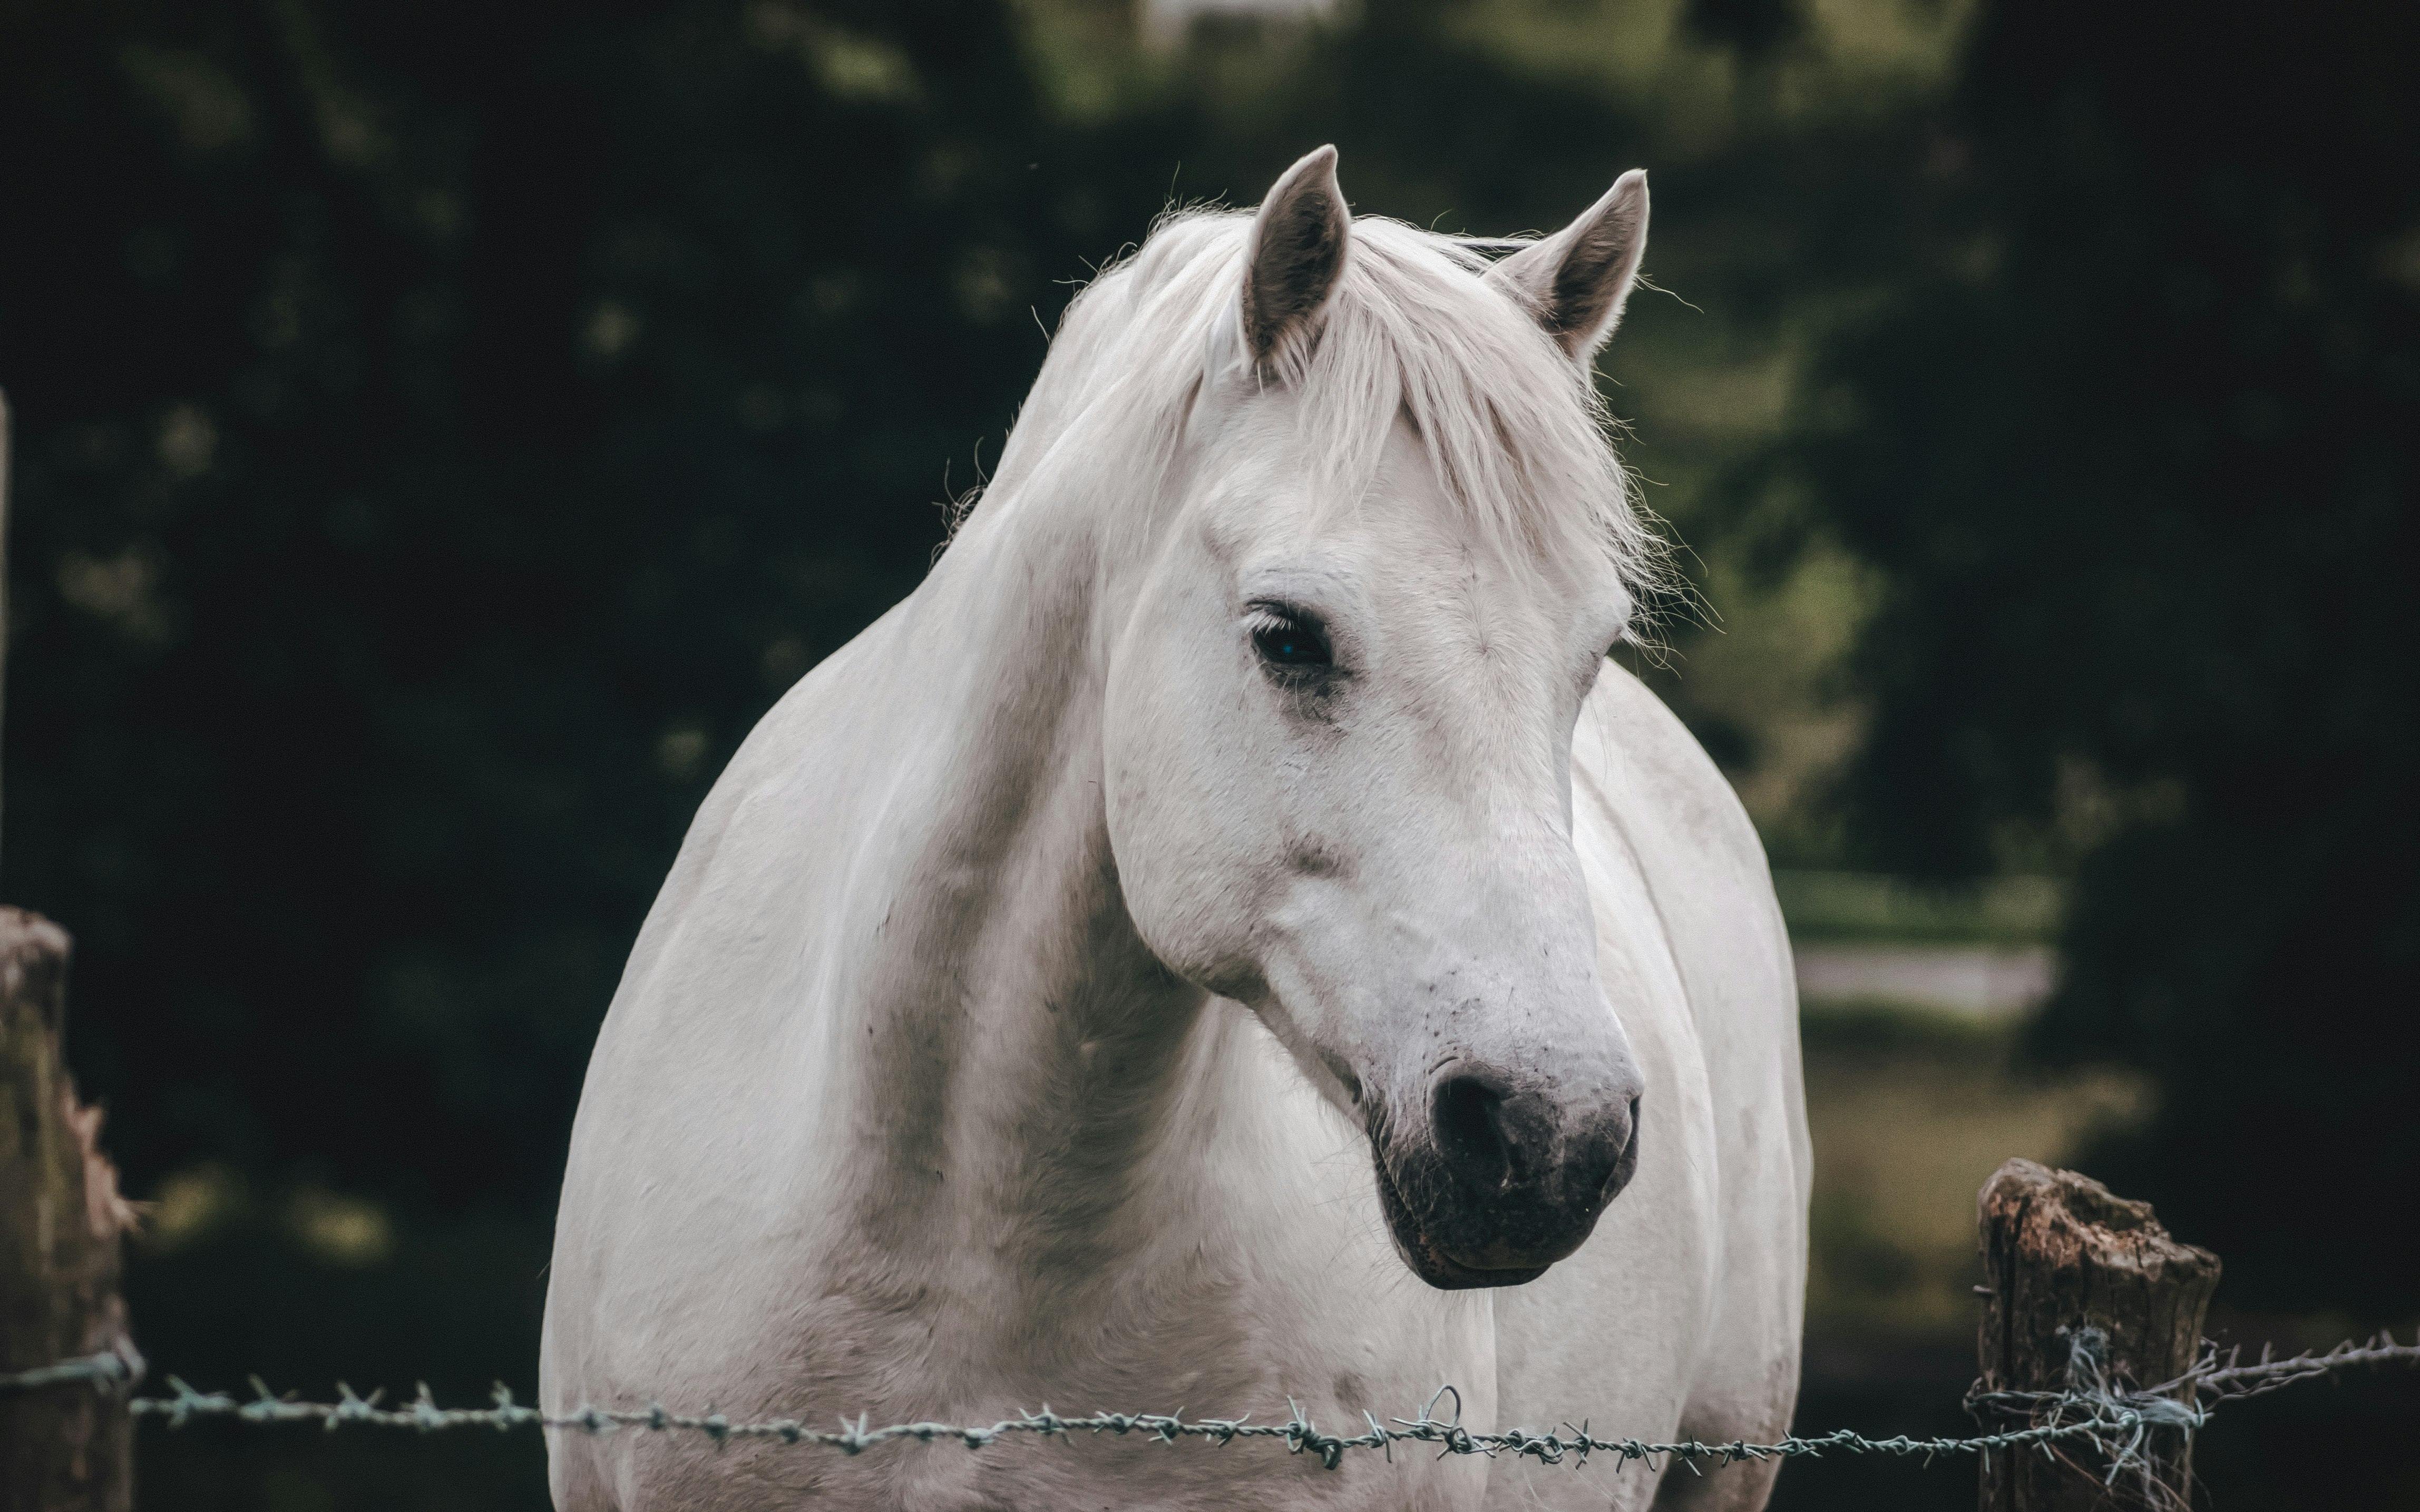 Meet Jake, an ornery white (grey) pony at the Burn Equestrian Centre in Belfast.